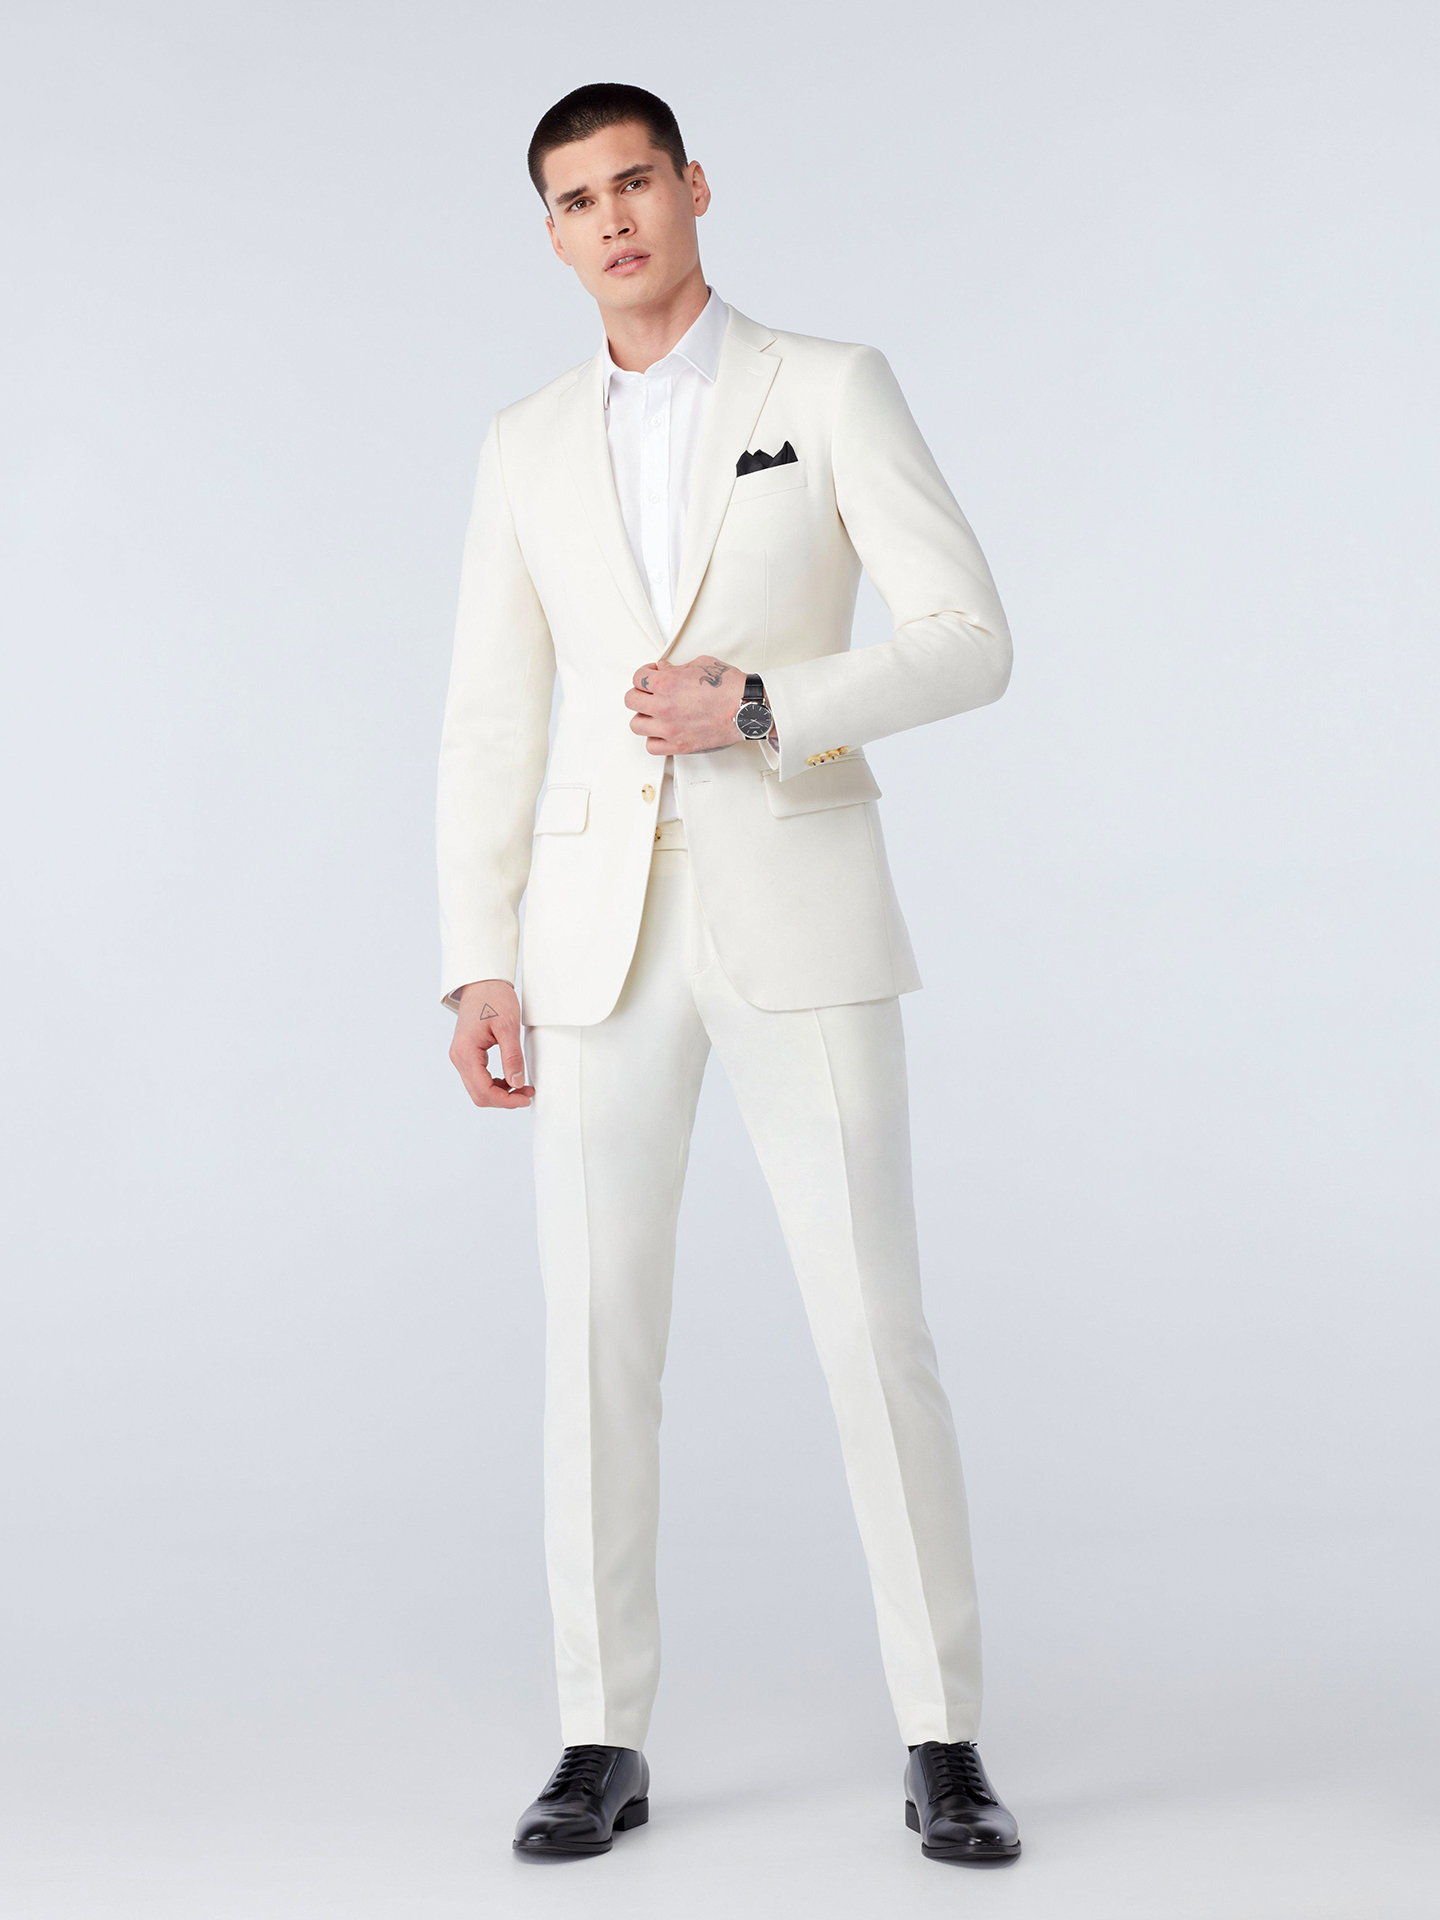 10 Classy White Suit Outfits for Men - Suits Expert